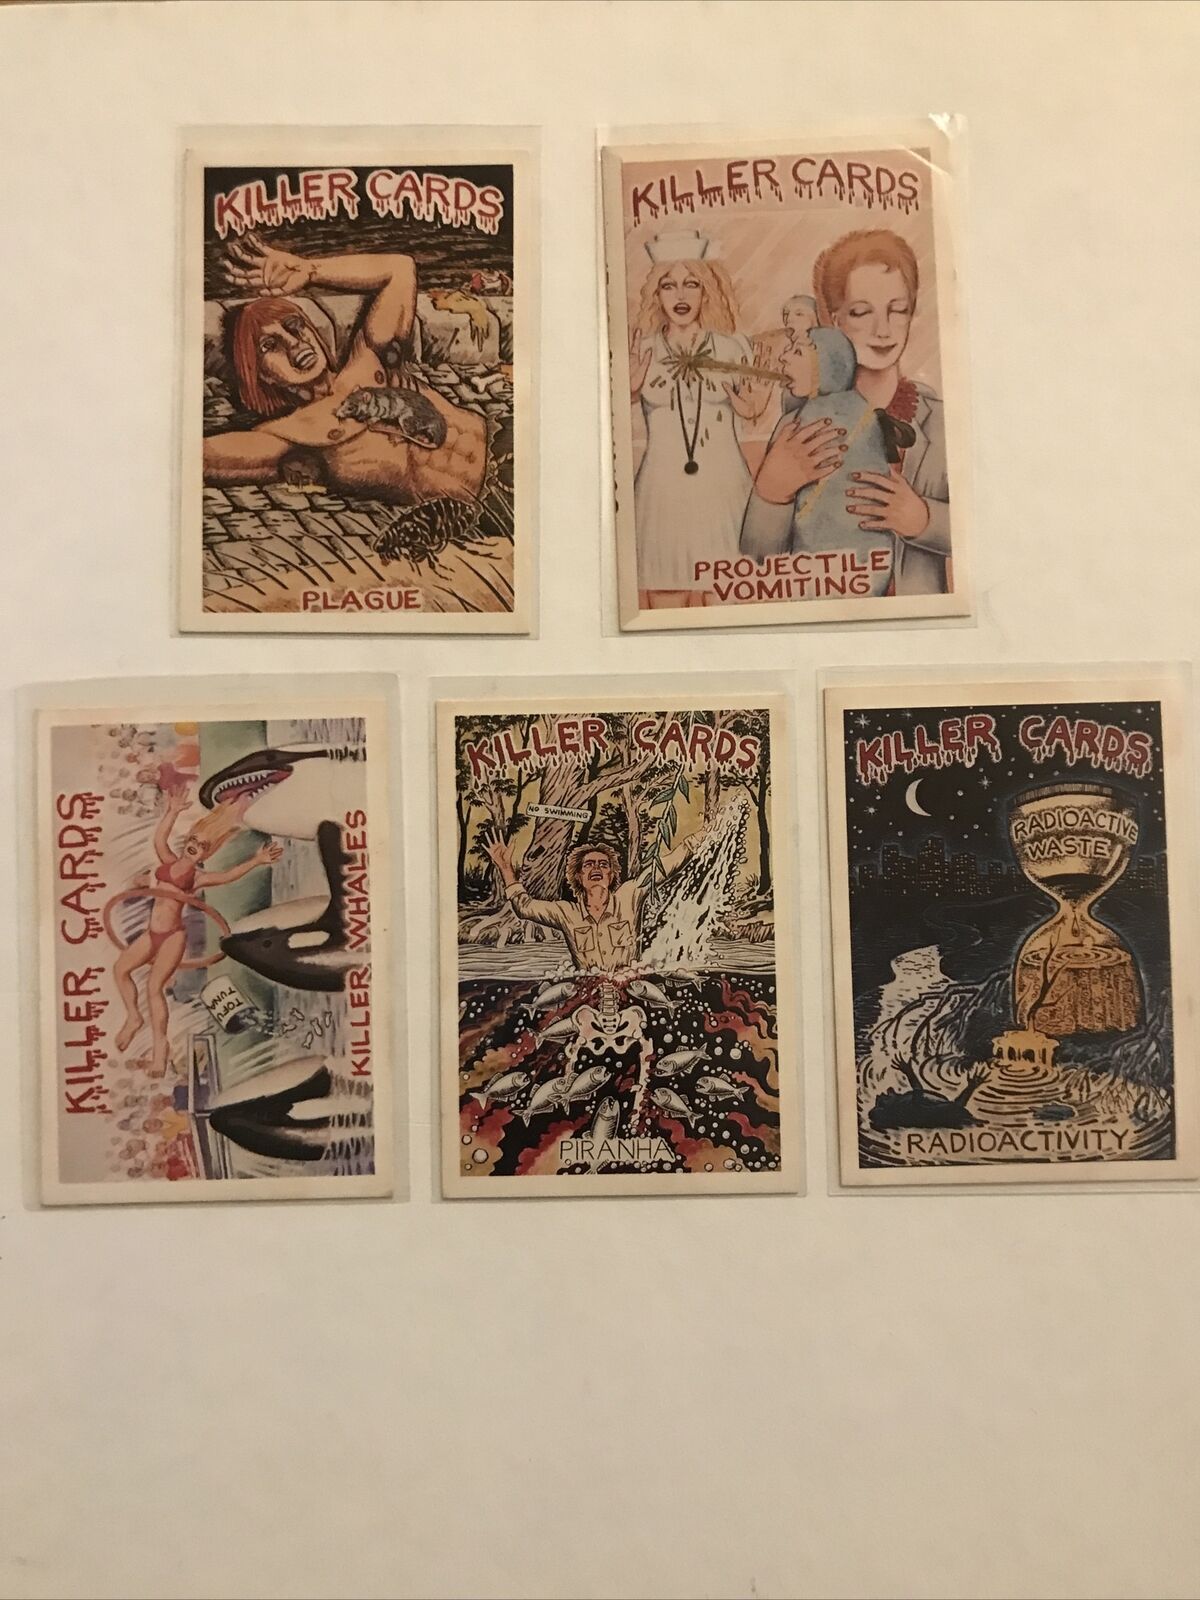 1988 Killer Cards 1st Series 2nd Edition Rare Great Condition Plague lot of 5